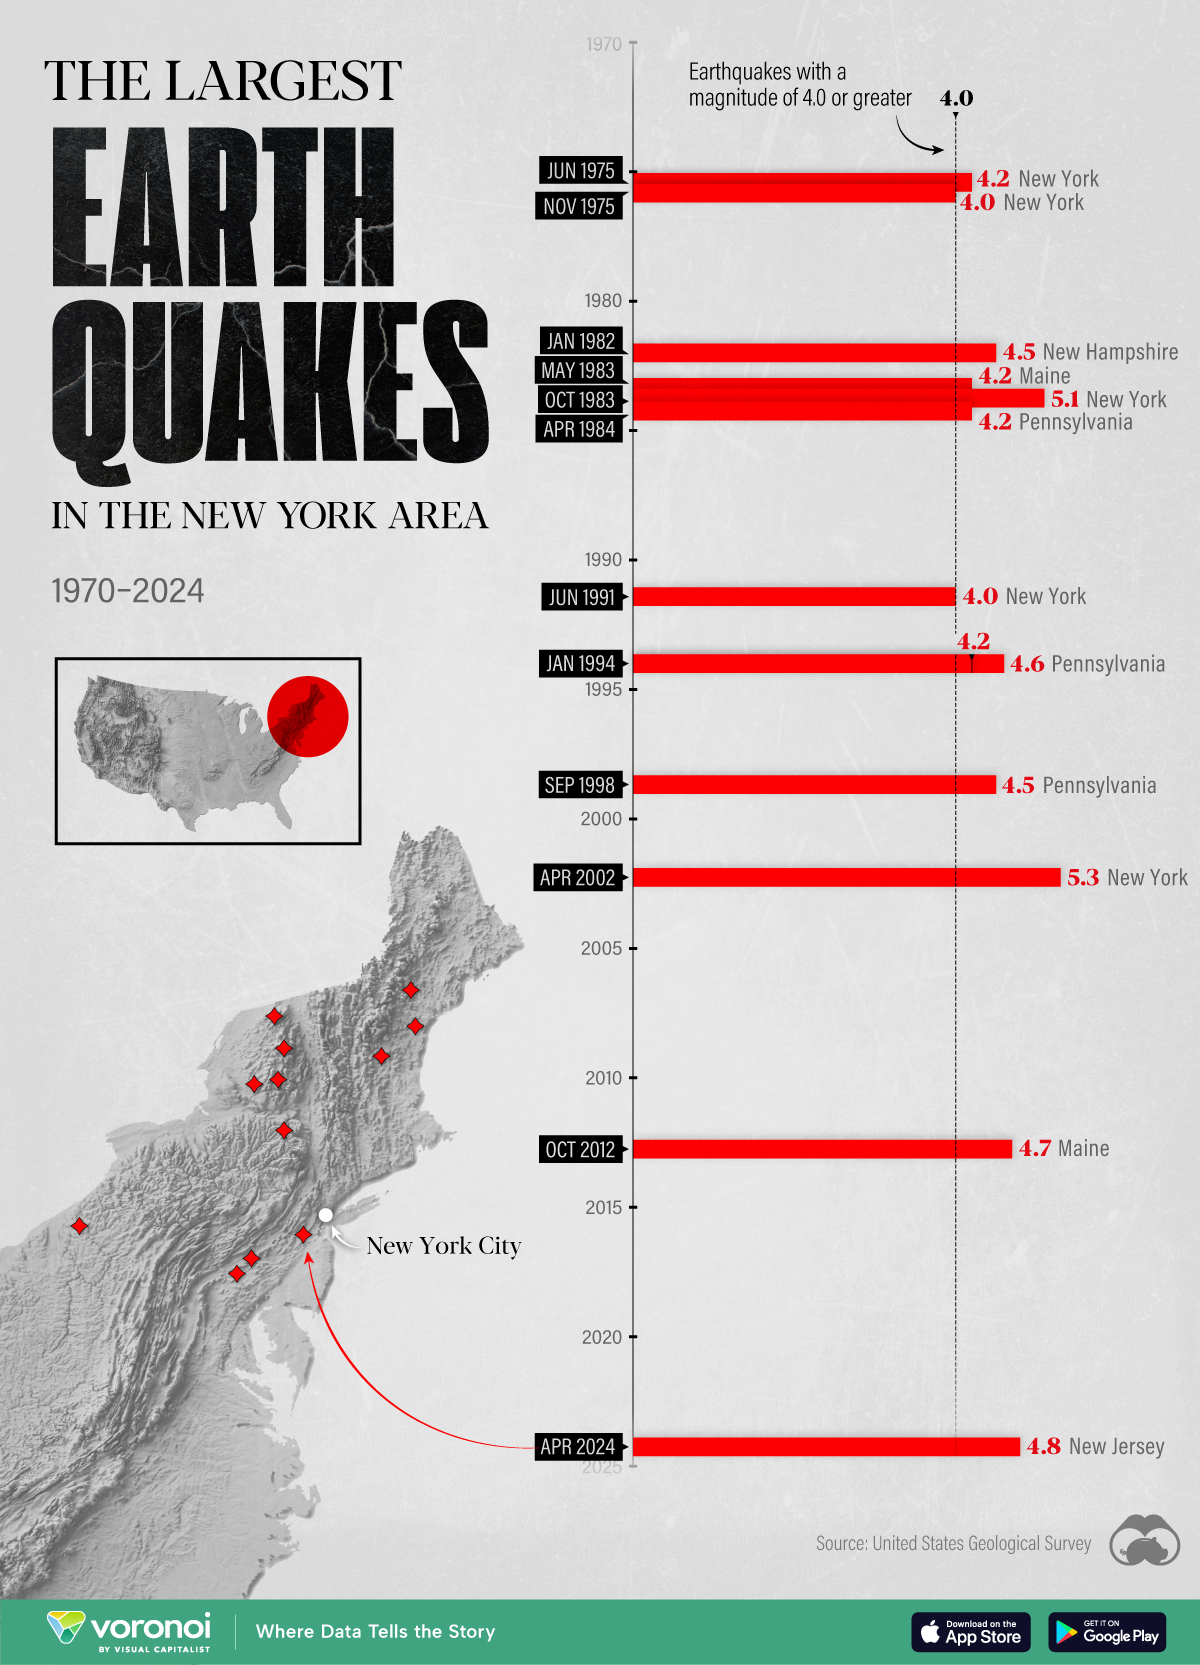 Map of earthquakes with a magnitude of 4.0 or greater recorded in the northeastern U.S. since 1970.